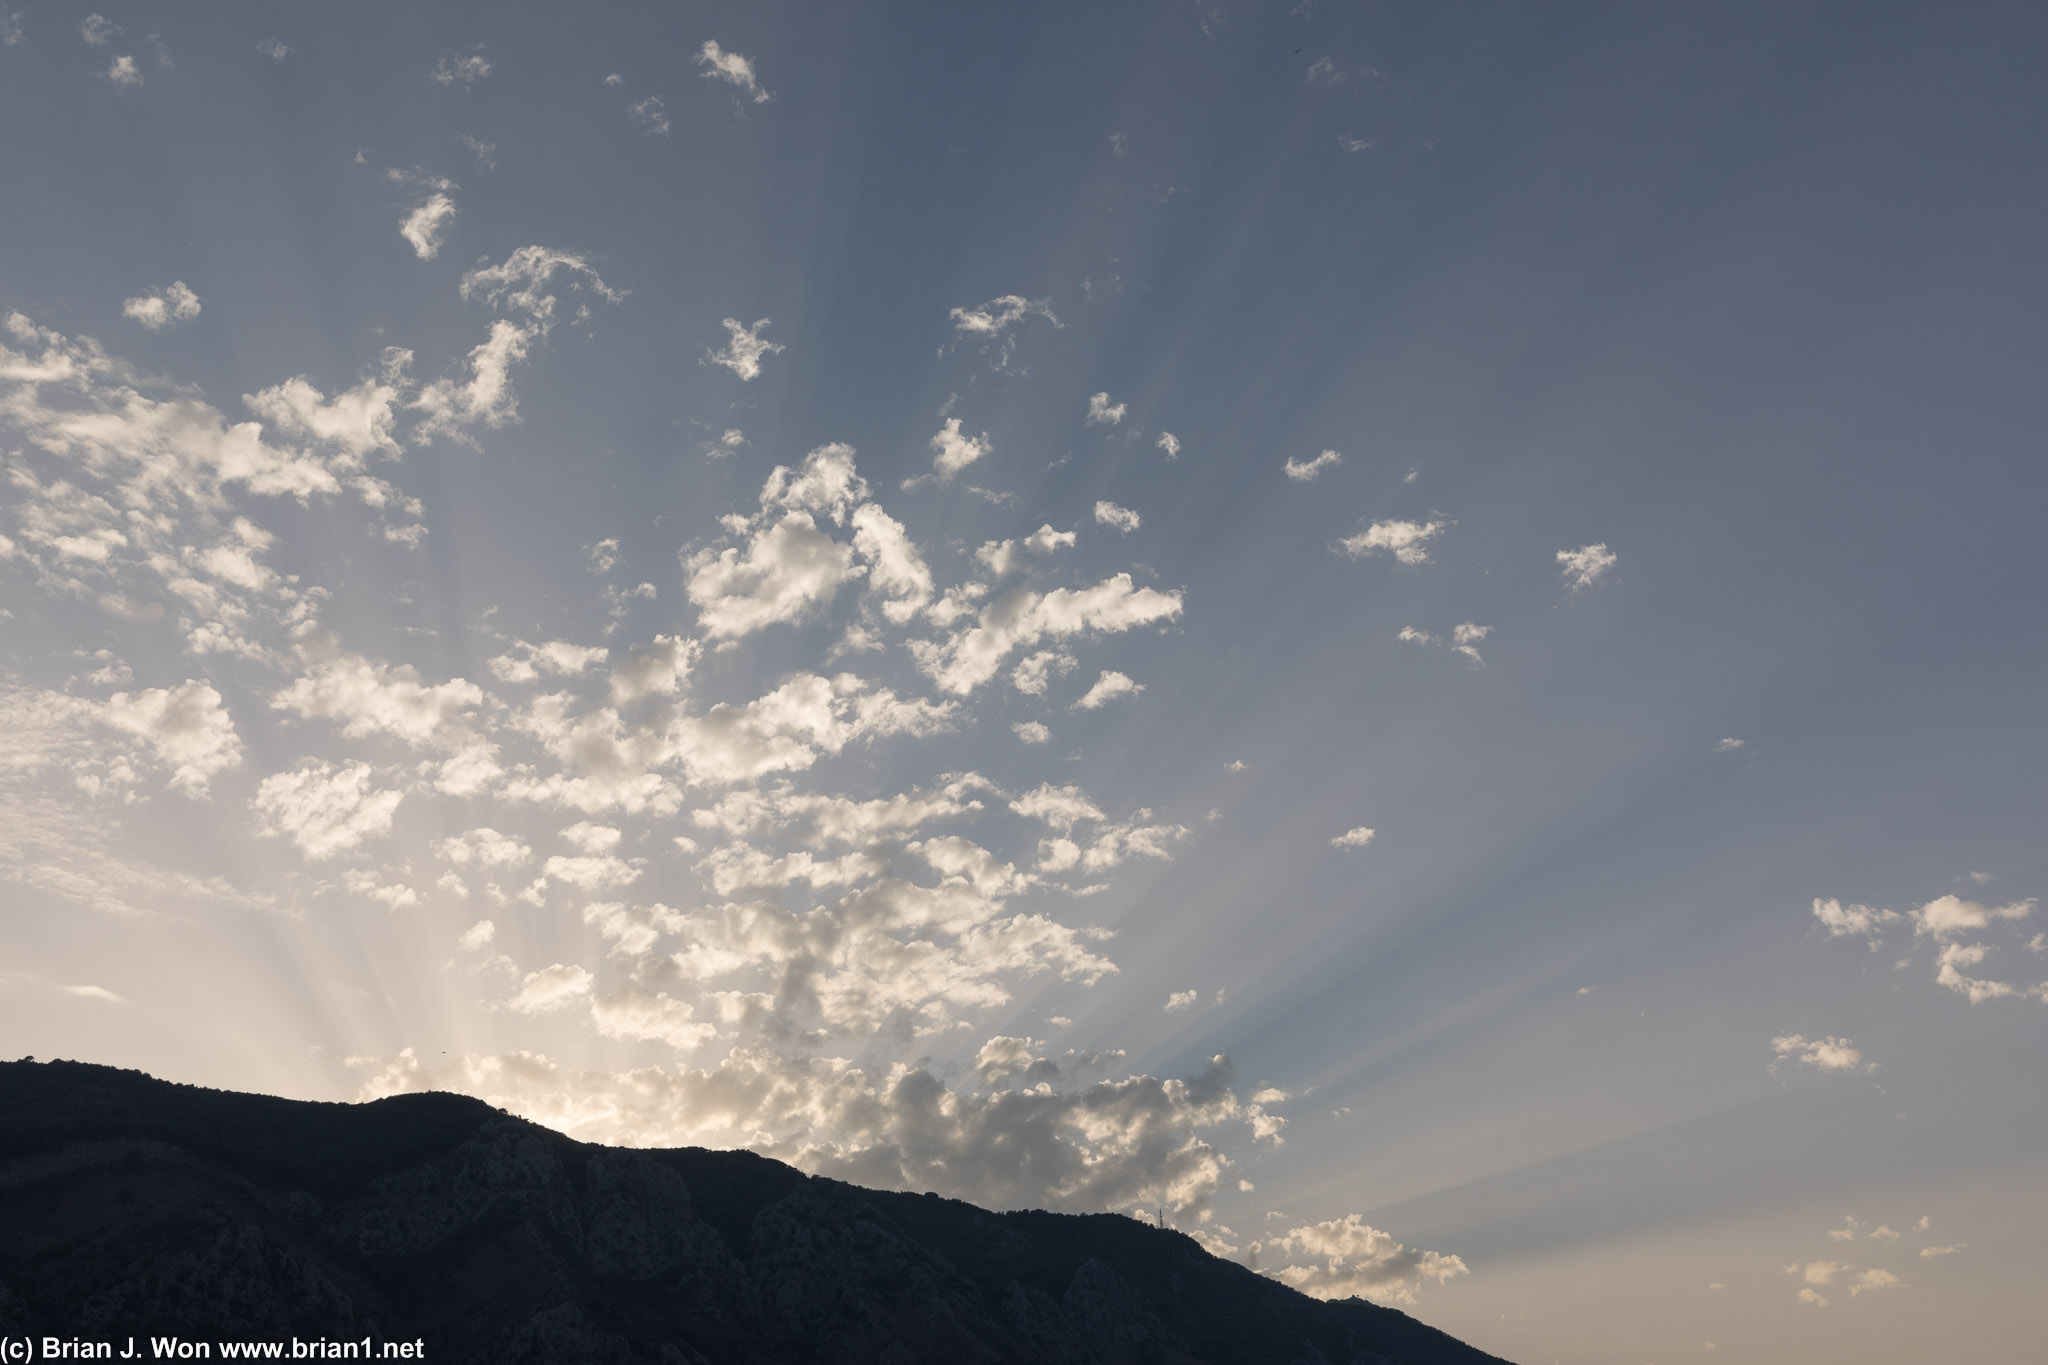 Sunset's rays over Bay of Kotor.